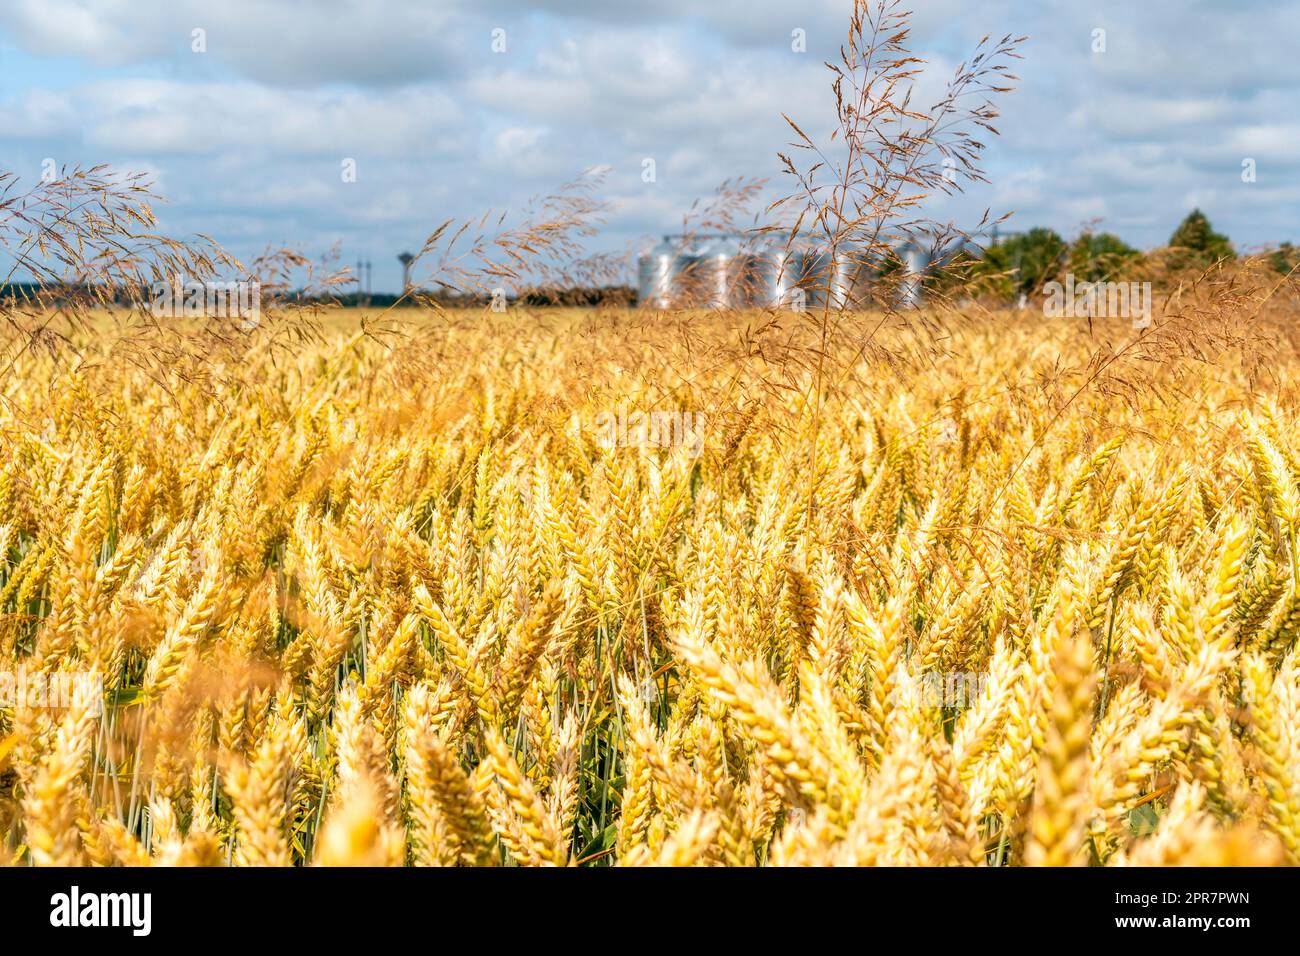 Grain storage silos system in a distance  behind a yellow wheat field Stock Photo